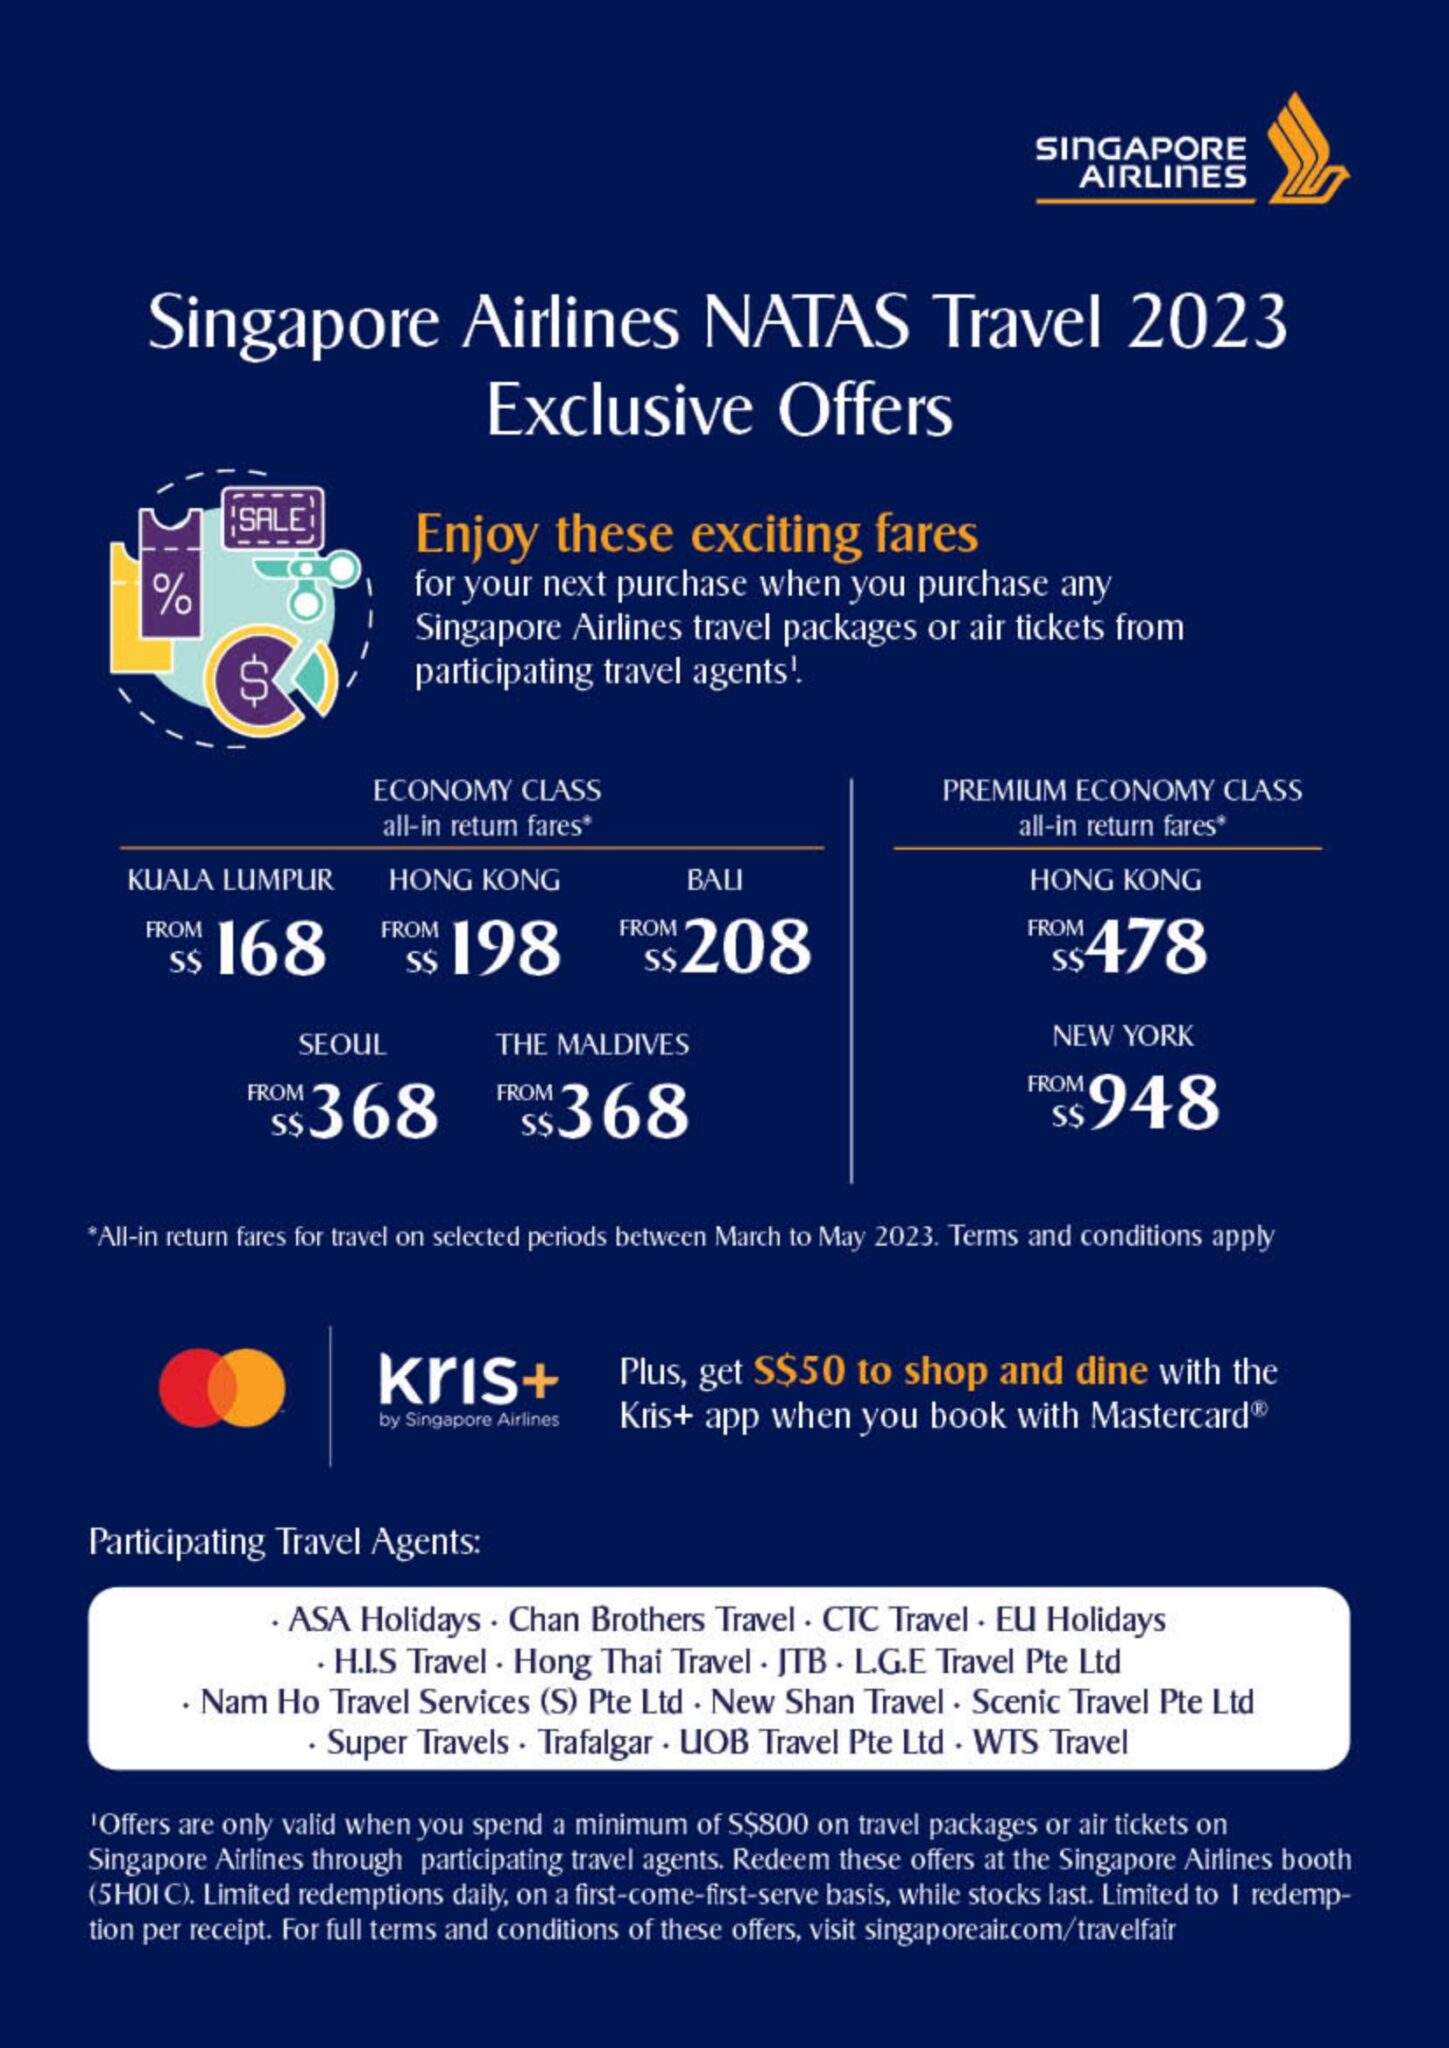 Singapore Airlines Promotions TripZilla SG